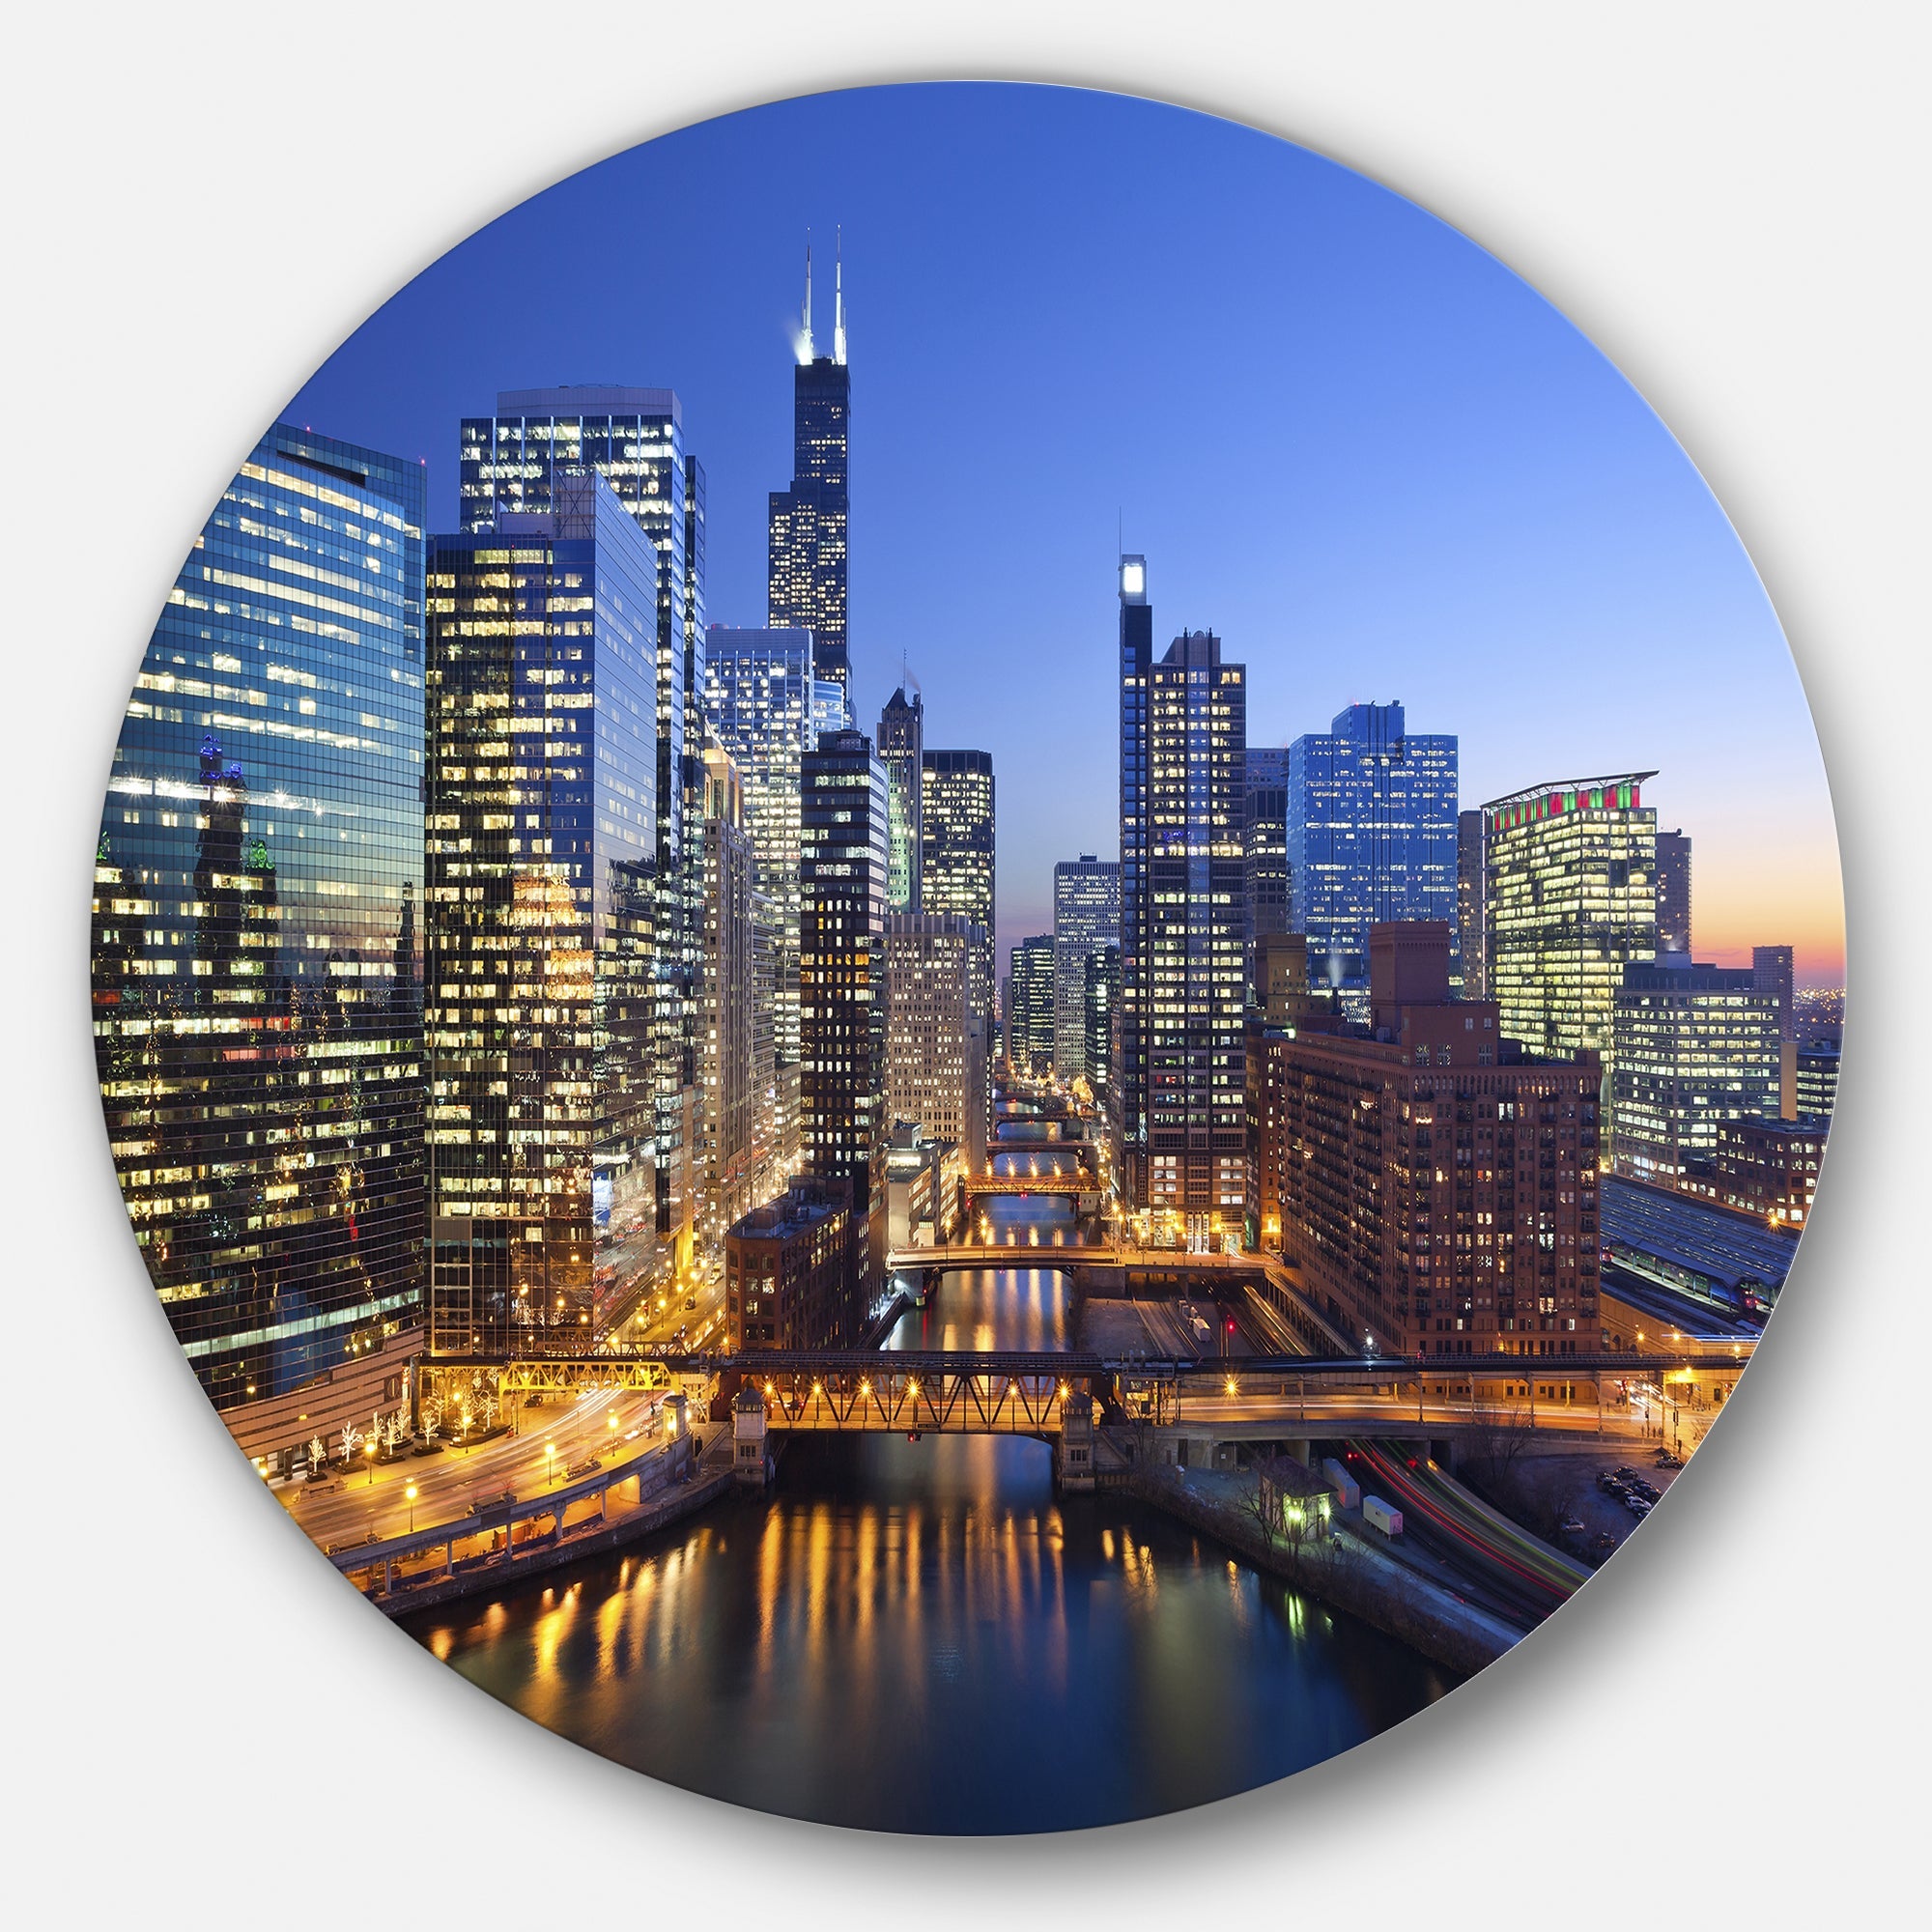 Chicago River with Bridges at Sunset Ultra Glossy Cityscape Circle Wall Art